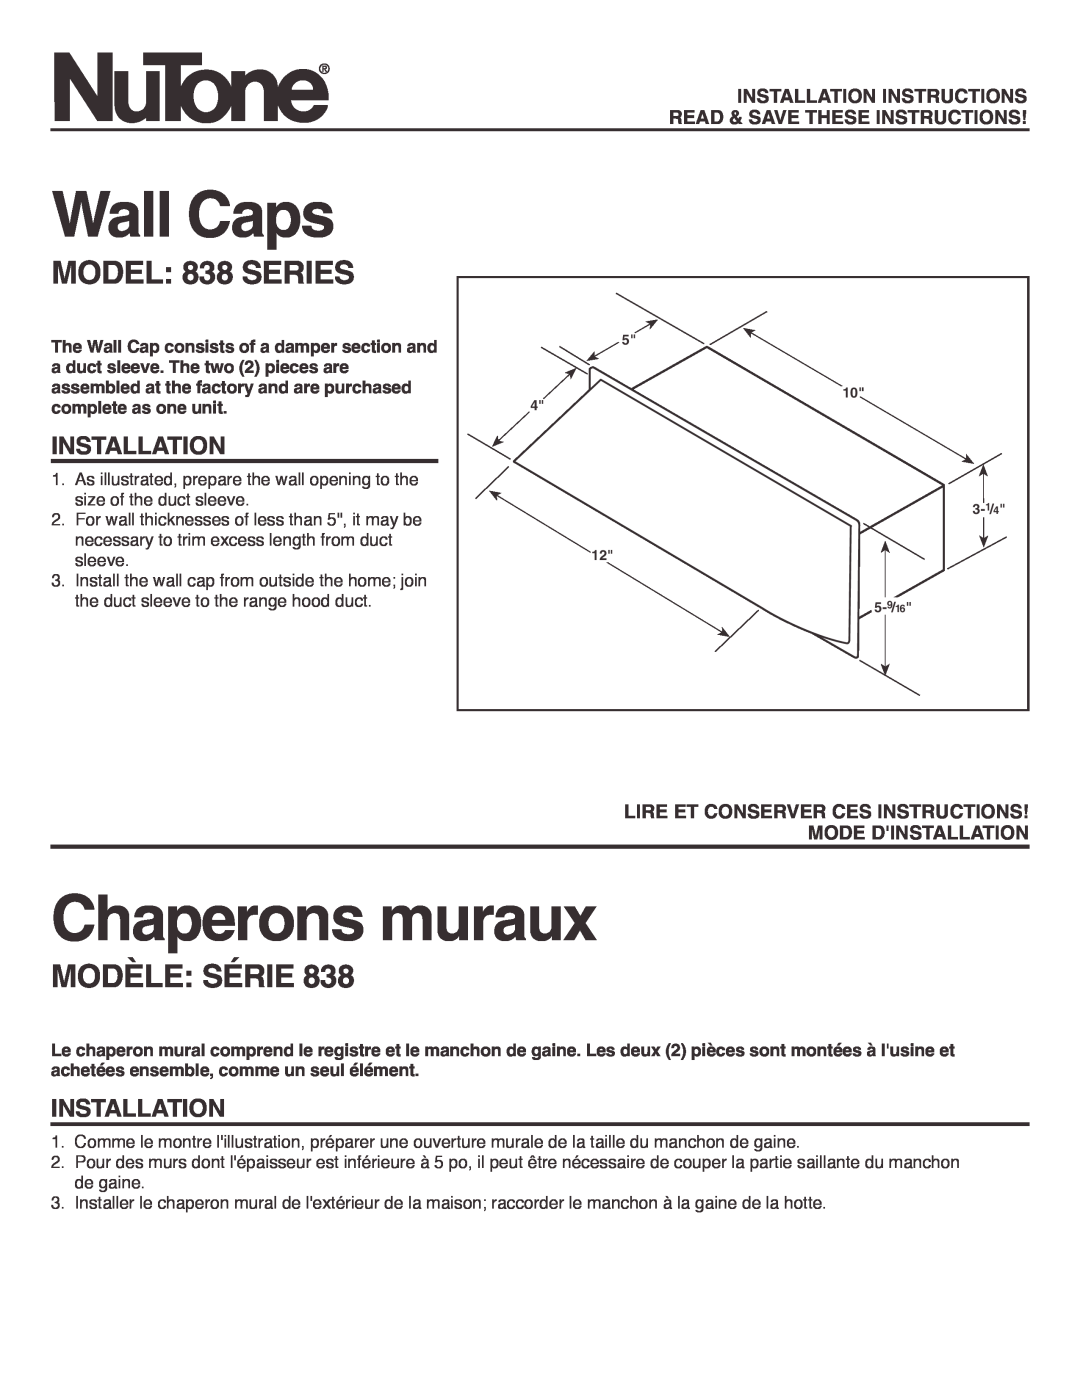 NuTone installation instructions Wall Caps, Chaperons muraux, MODEL 838 SERIES, Modèle Série, Installation 